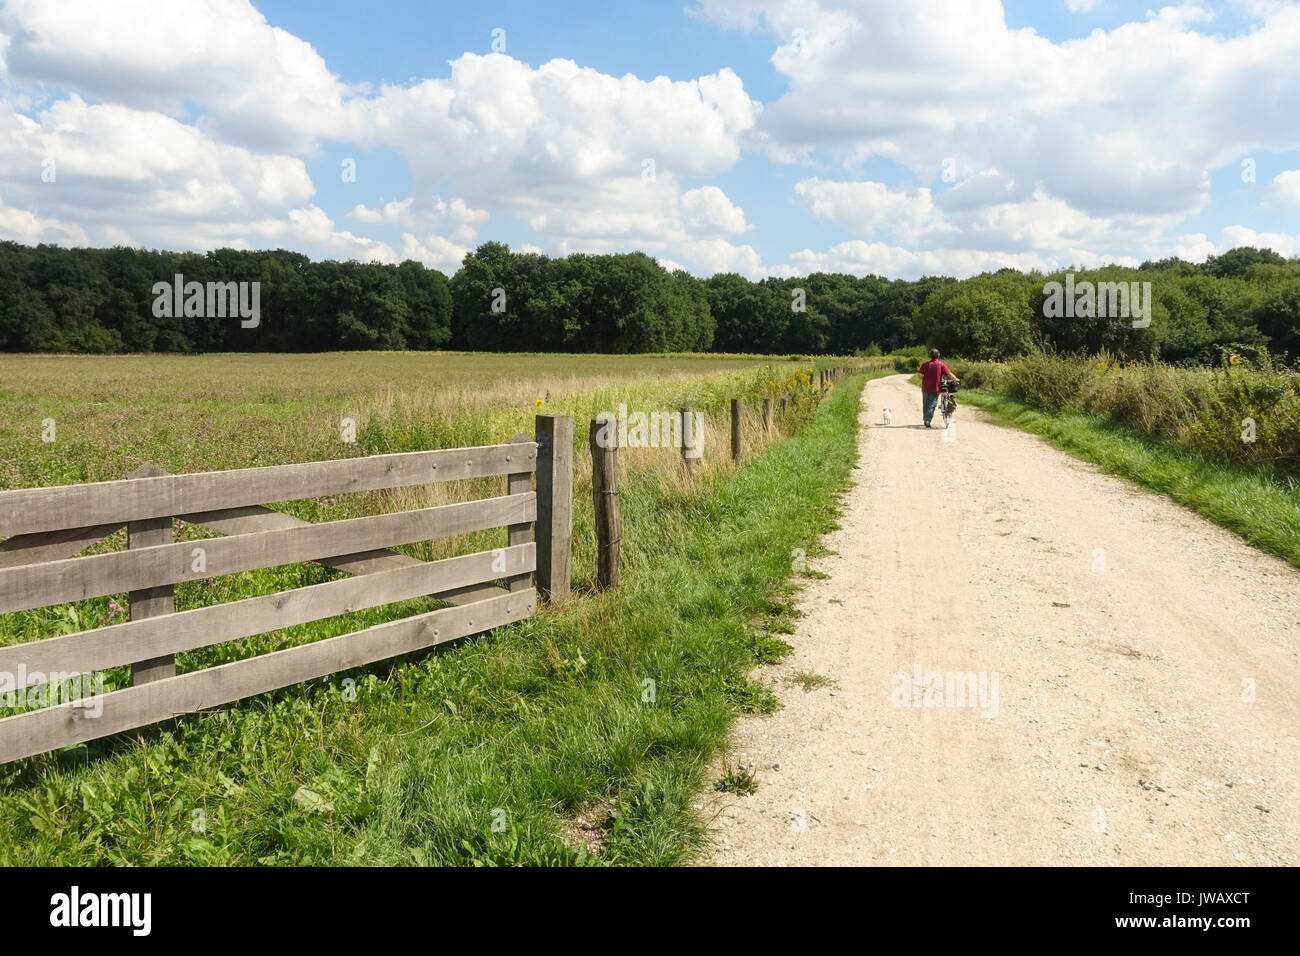 Closed of protected meadow fields, resting areas for wild animals, Natuurmonumenten, Schinveld, Limburg, Netherlands Stock Photo